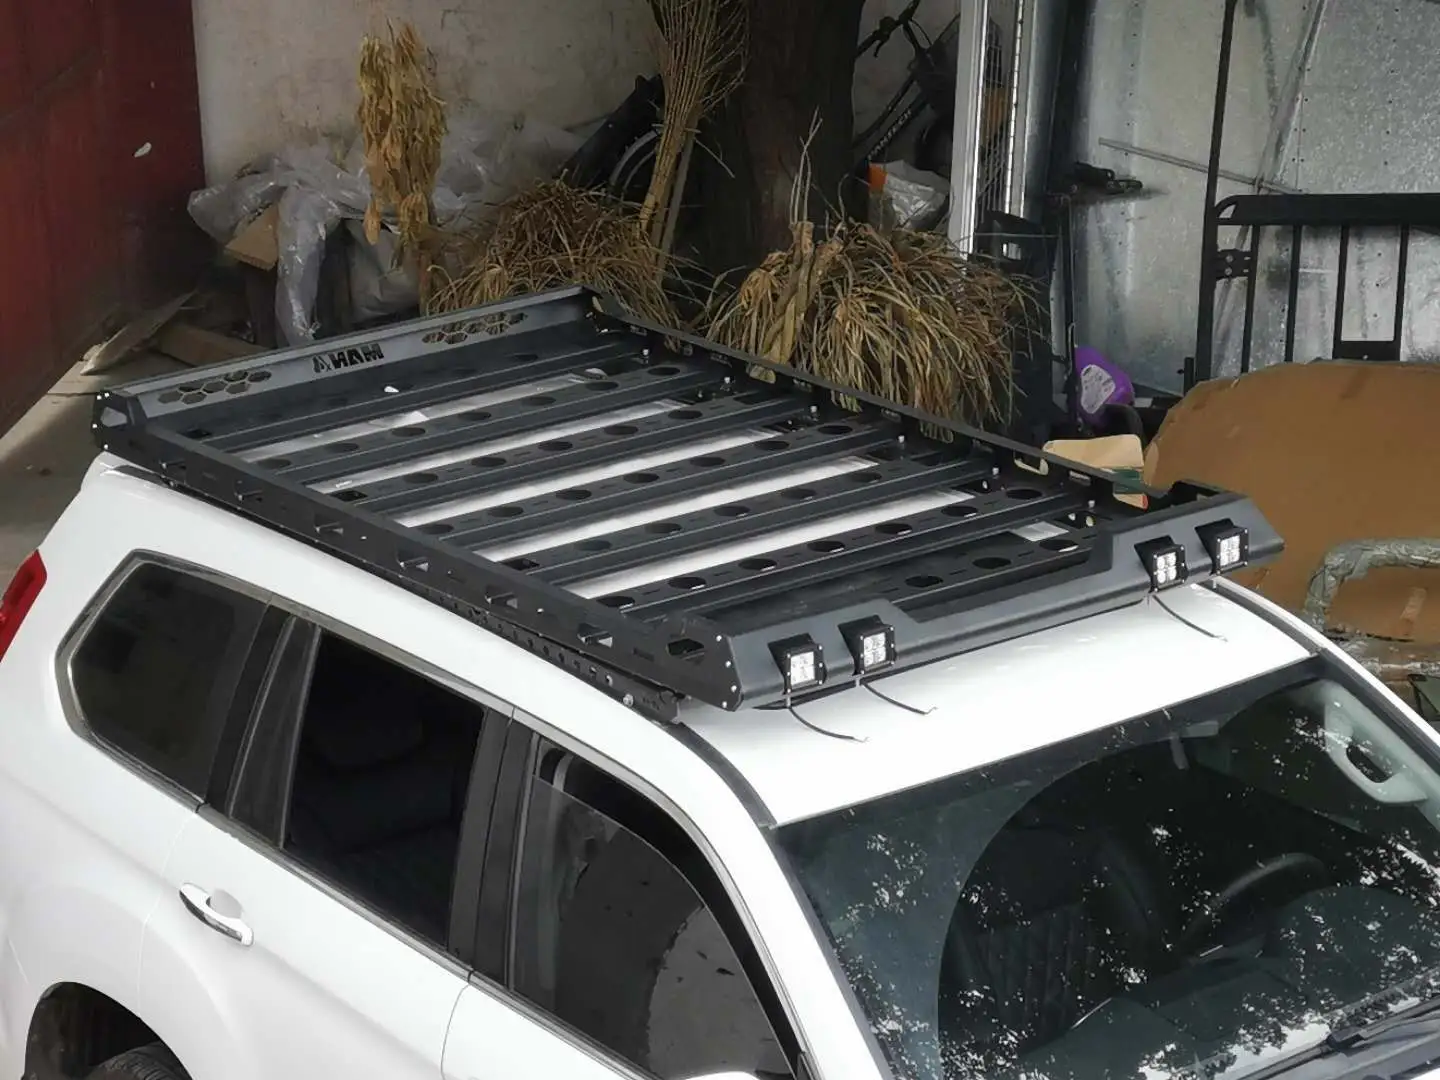 4x4 Roof Rack With Steel Material Car Universal Roof Rack Luggage Rack 4x4 Off Road